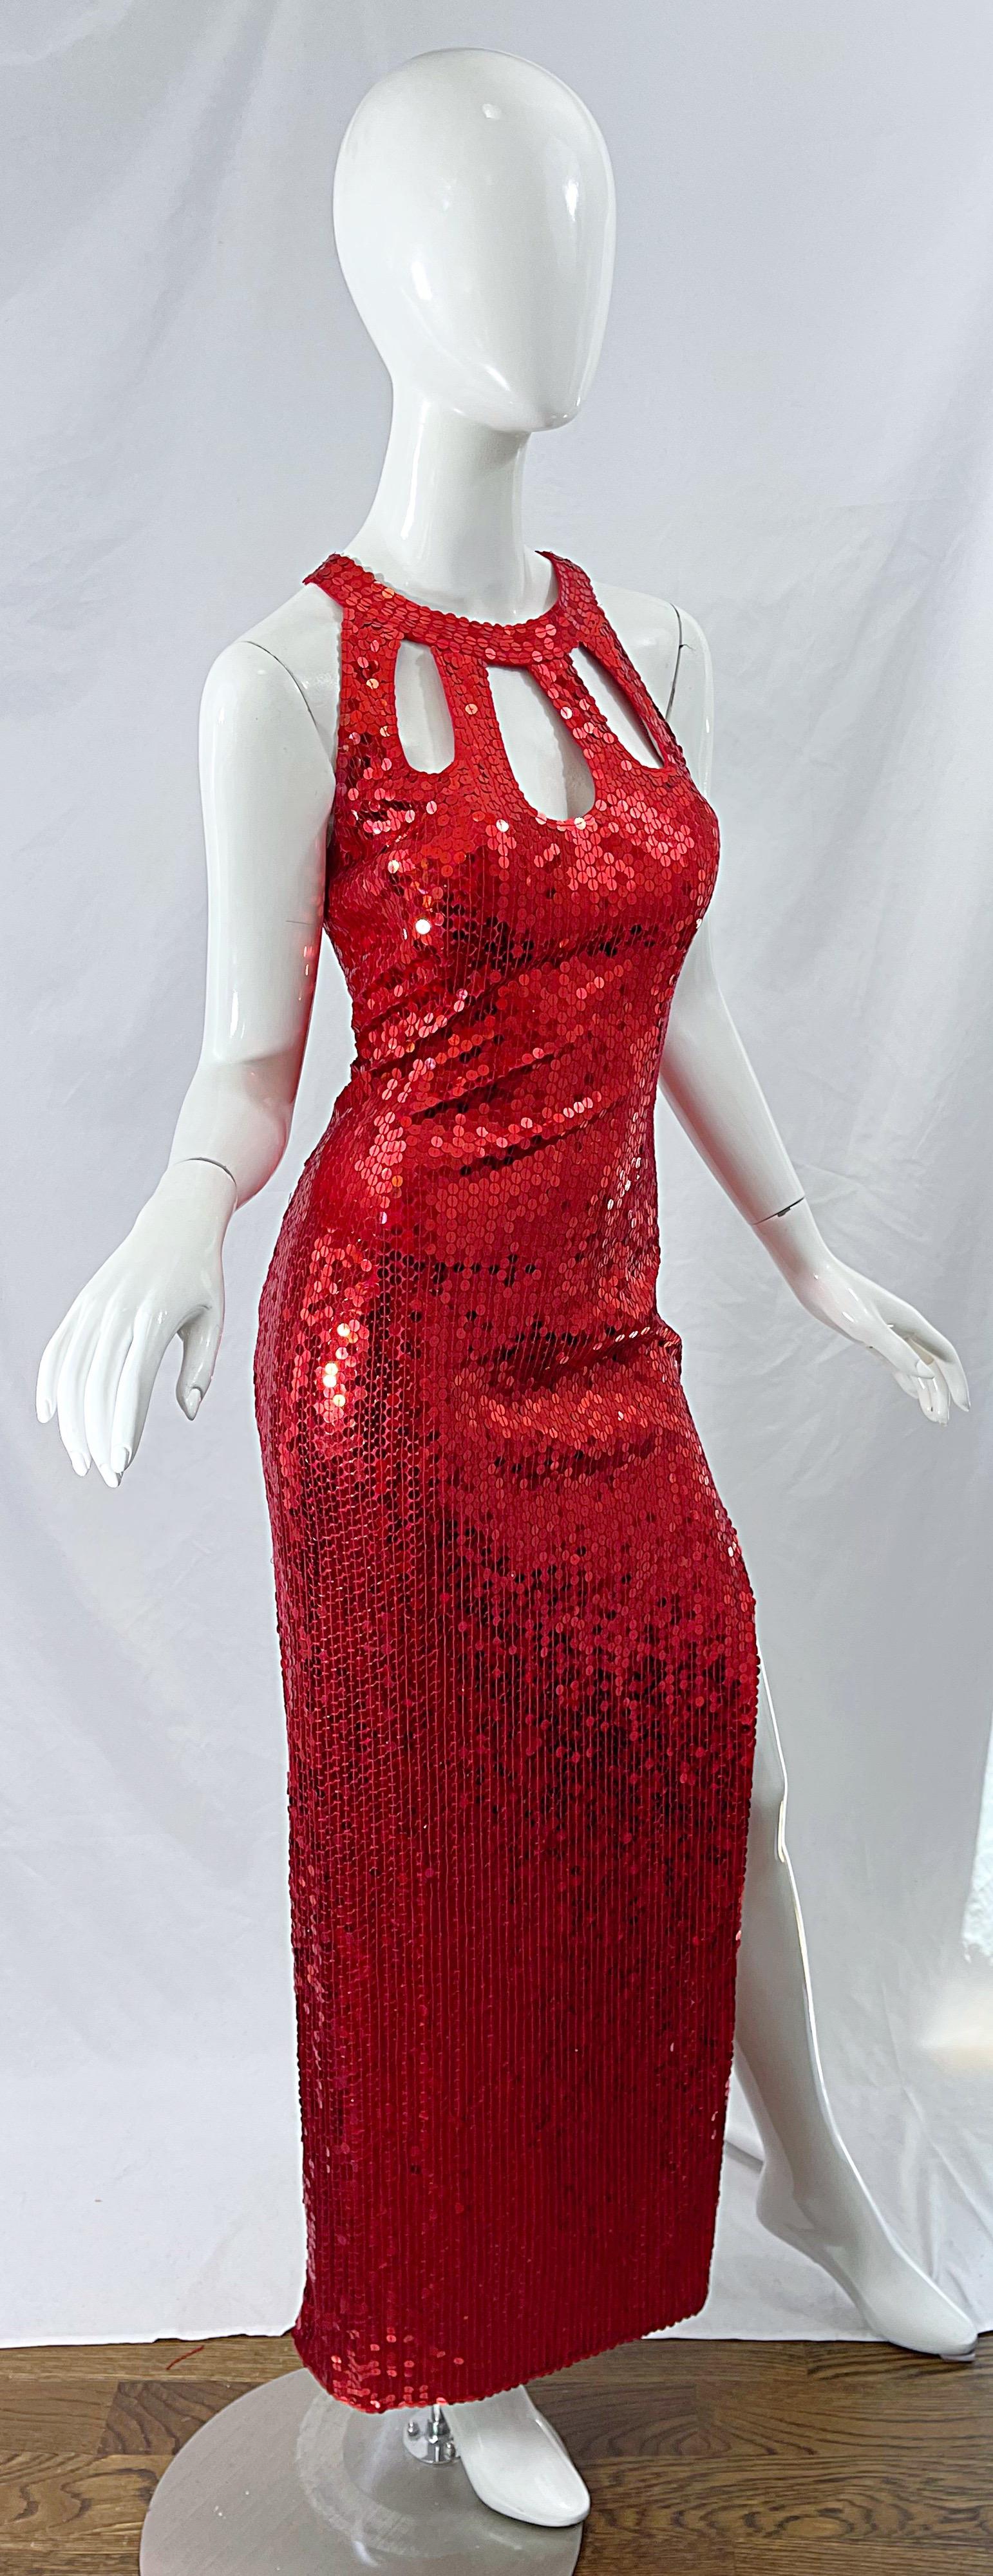 1990s Lipstick Red Sequin Size 10 Sexy Cut Out Vintage 90s Evening Gown Dress For Sale 3